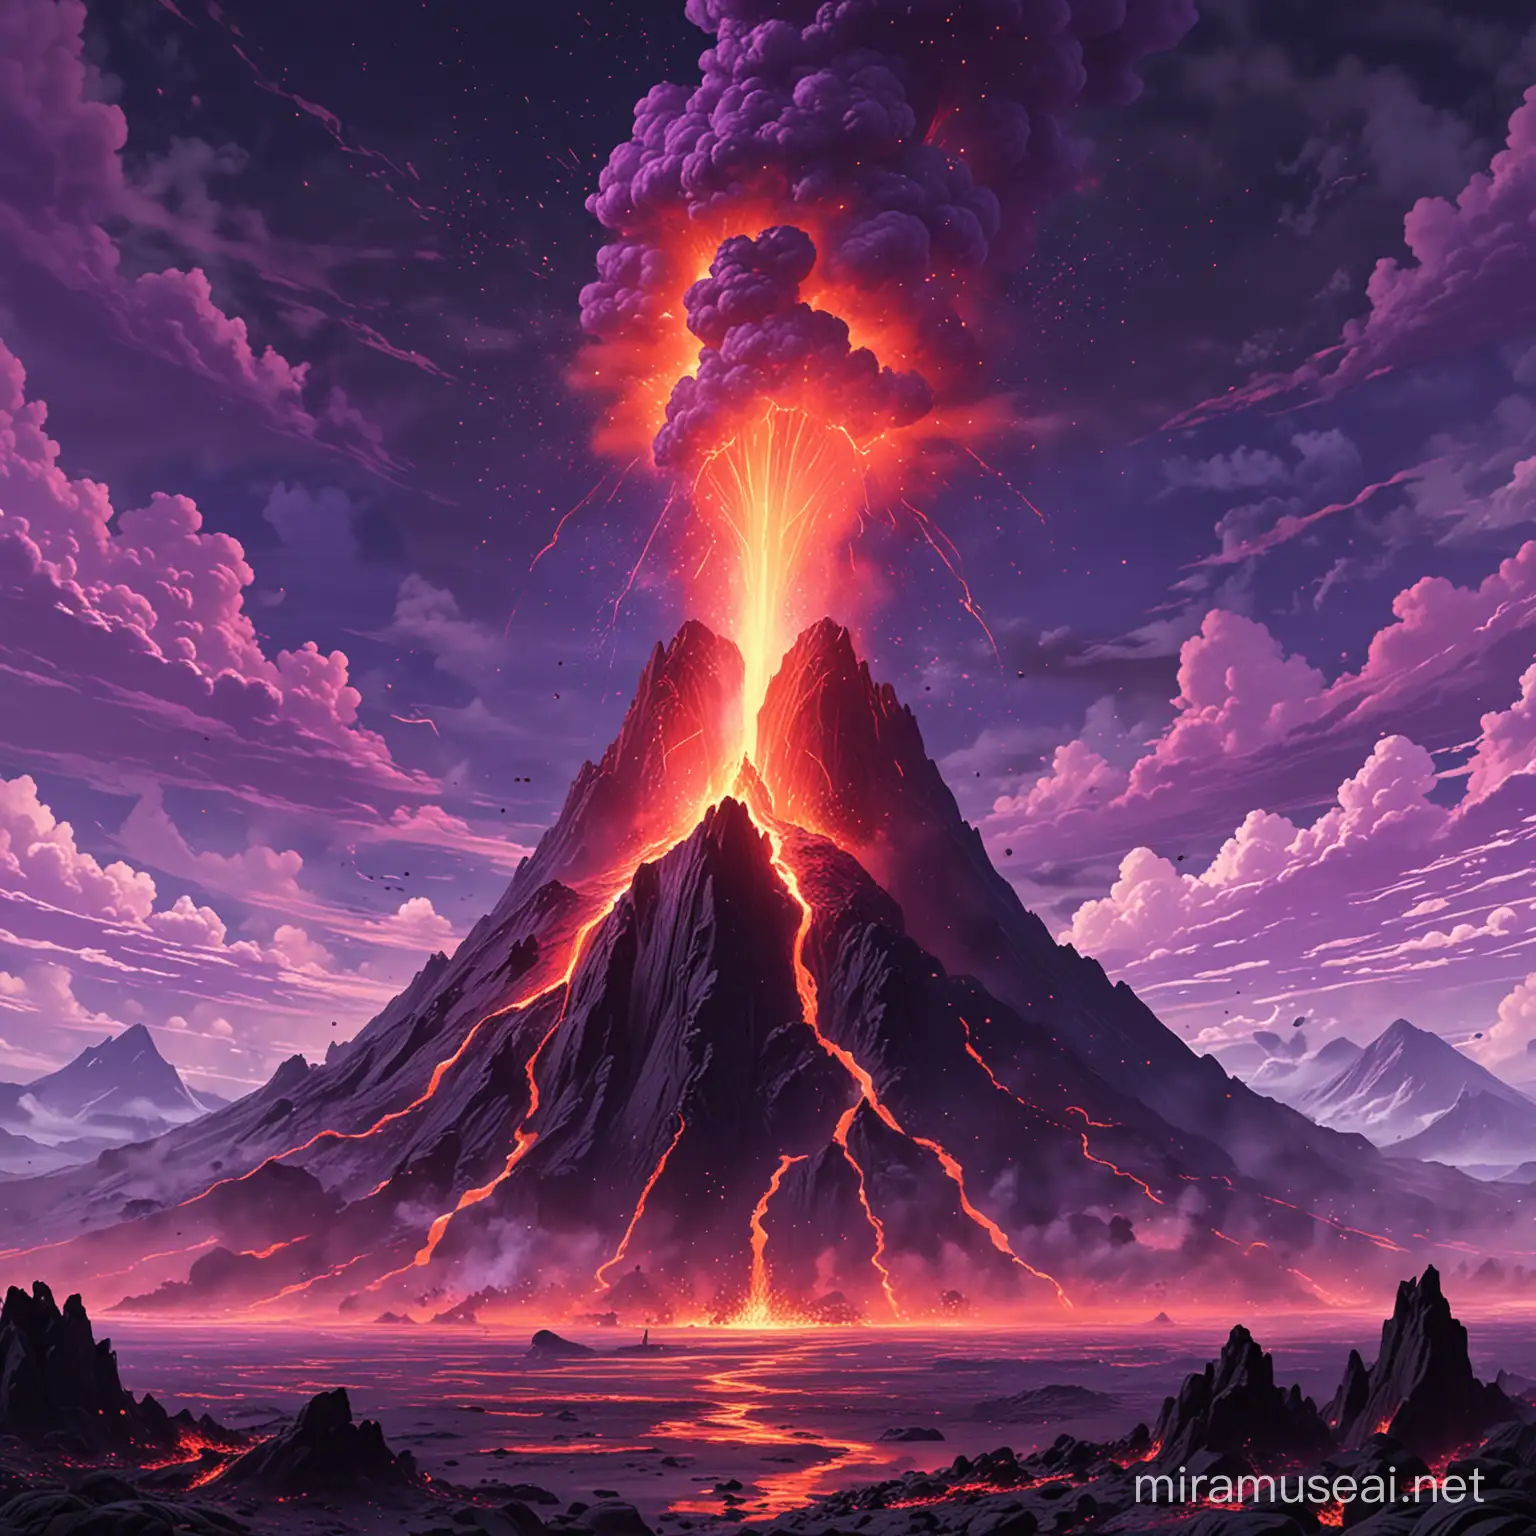 Animestyle Purple Lava Explosion from Towering Volcano